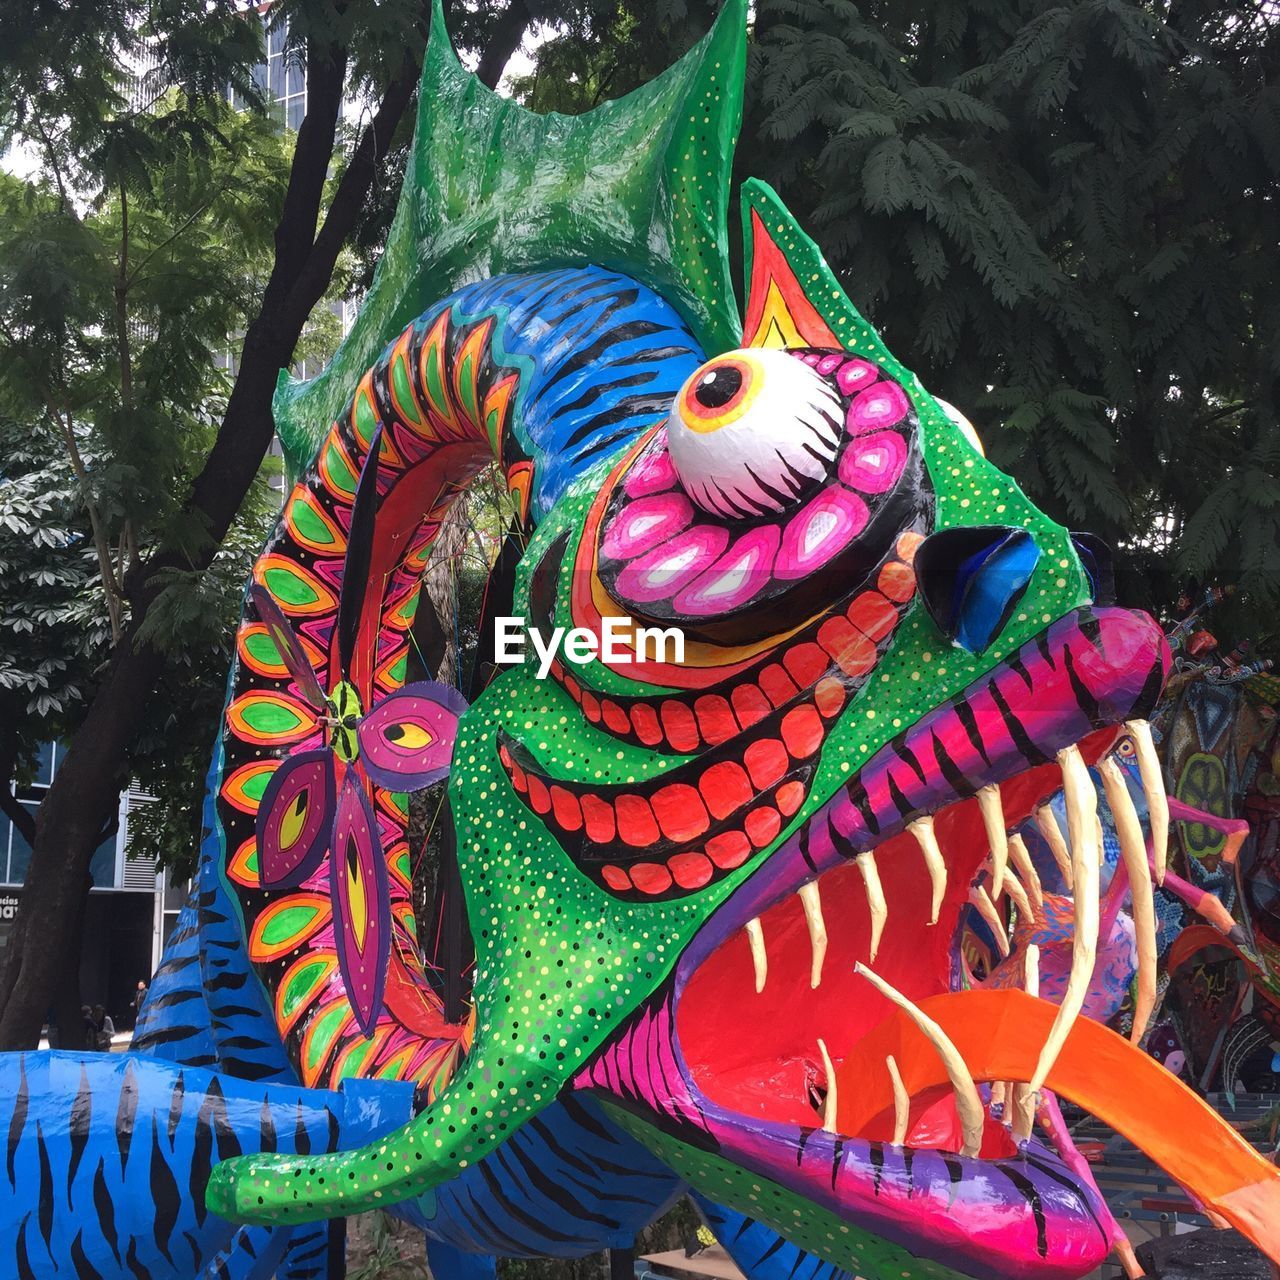 CLOSE-UP OF COLORFUL SCULPTURE